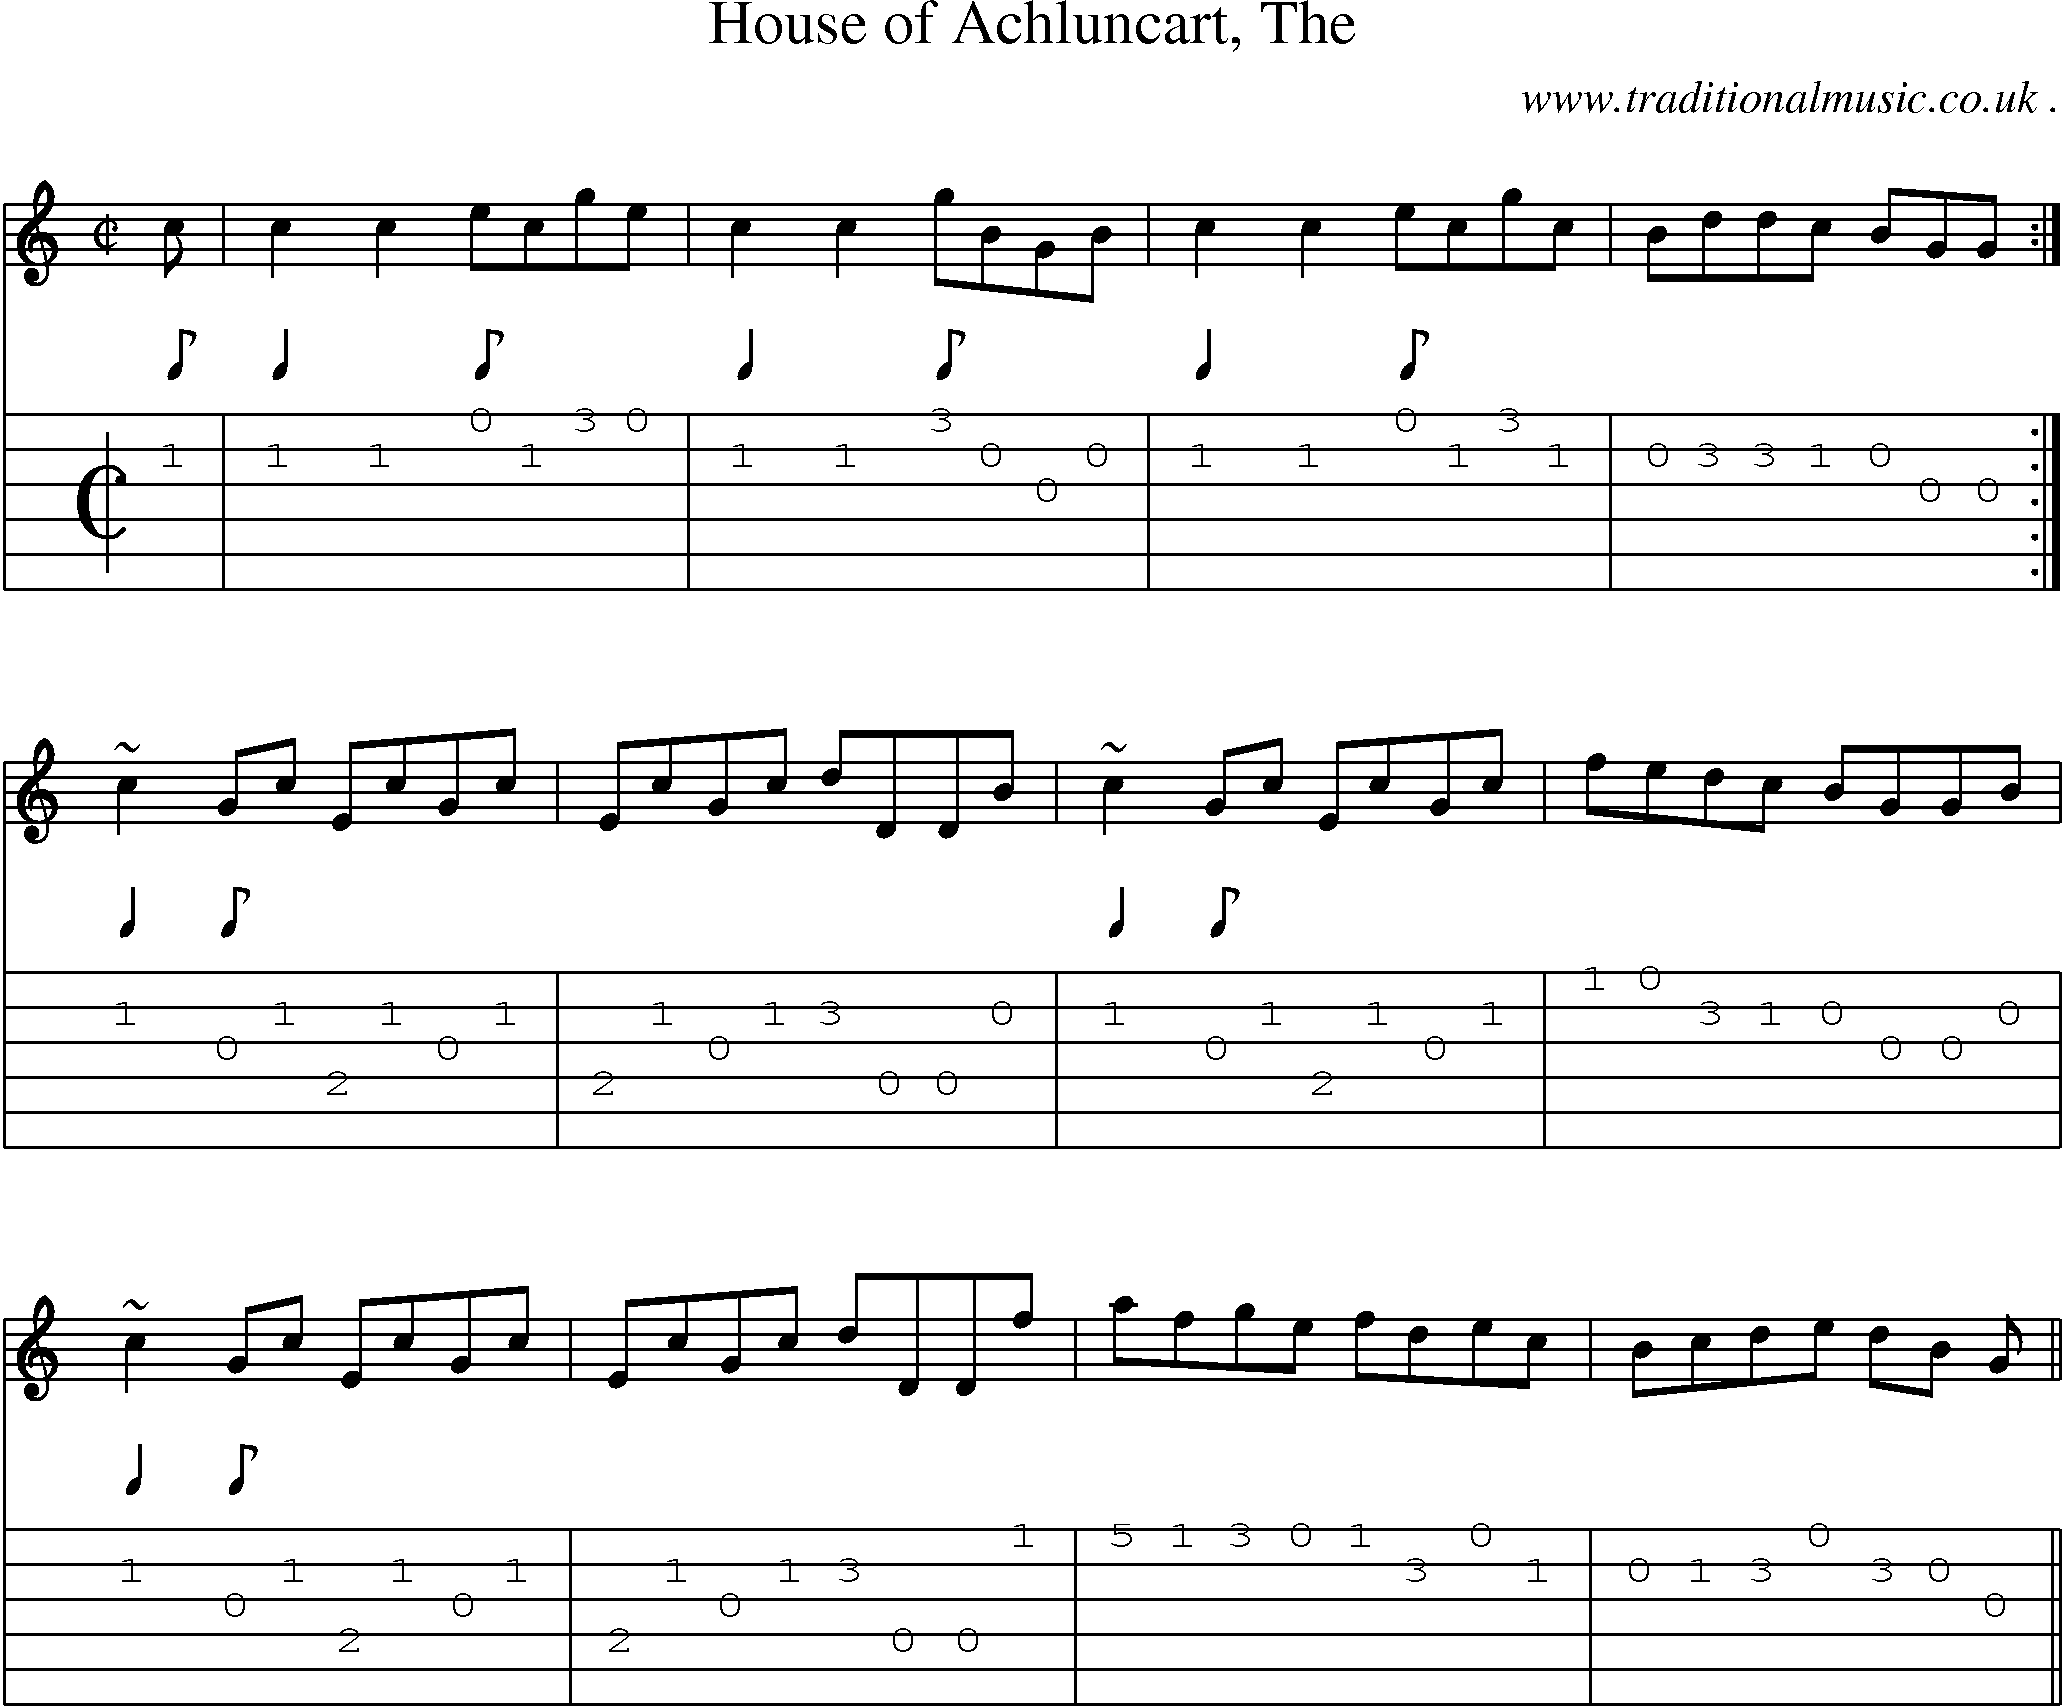 Sheet-music  score, Chords and Guitar Tabs for House Of Achluncart The